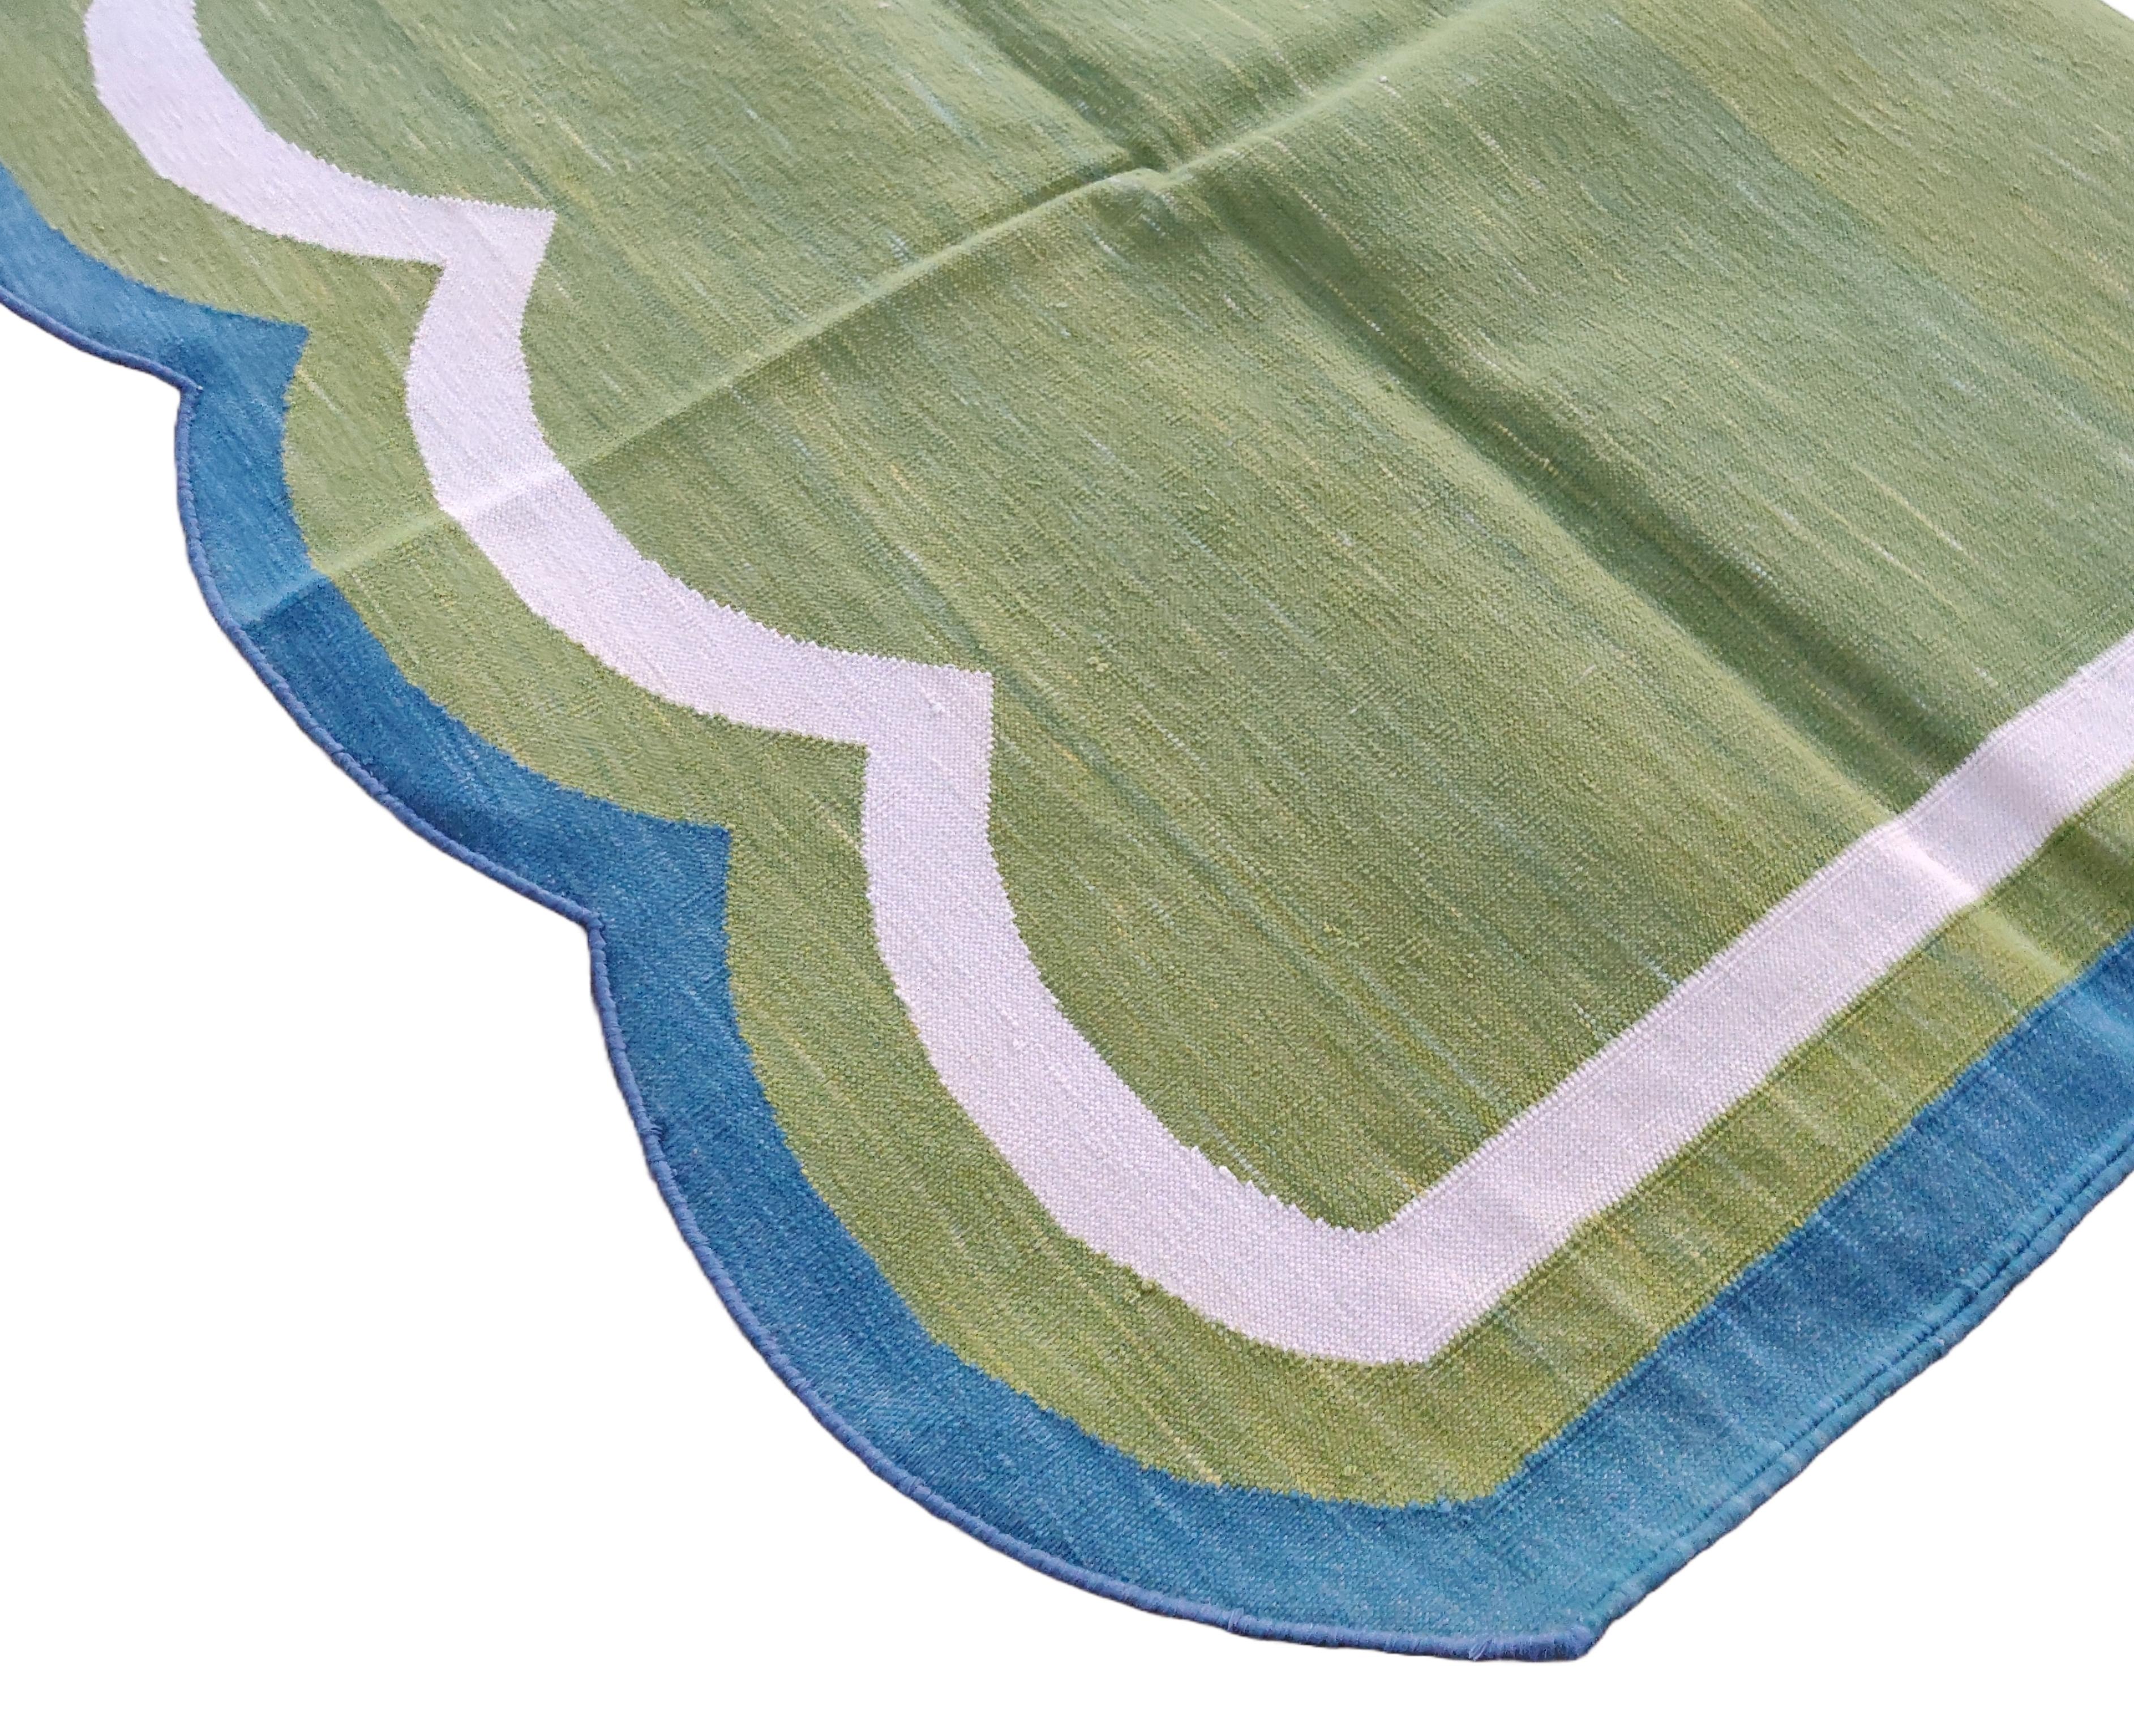 Cotton Vegetable Dyed Moss Green And Blue Scalloped Striped Indian Dhurrie Rug-5'x7' 
These special flat-weave dhurries are hand-woven with 15 ply 100% cotton yarn. Due to the special manufacturing techniques used to create our rugs, the size and